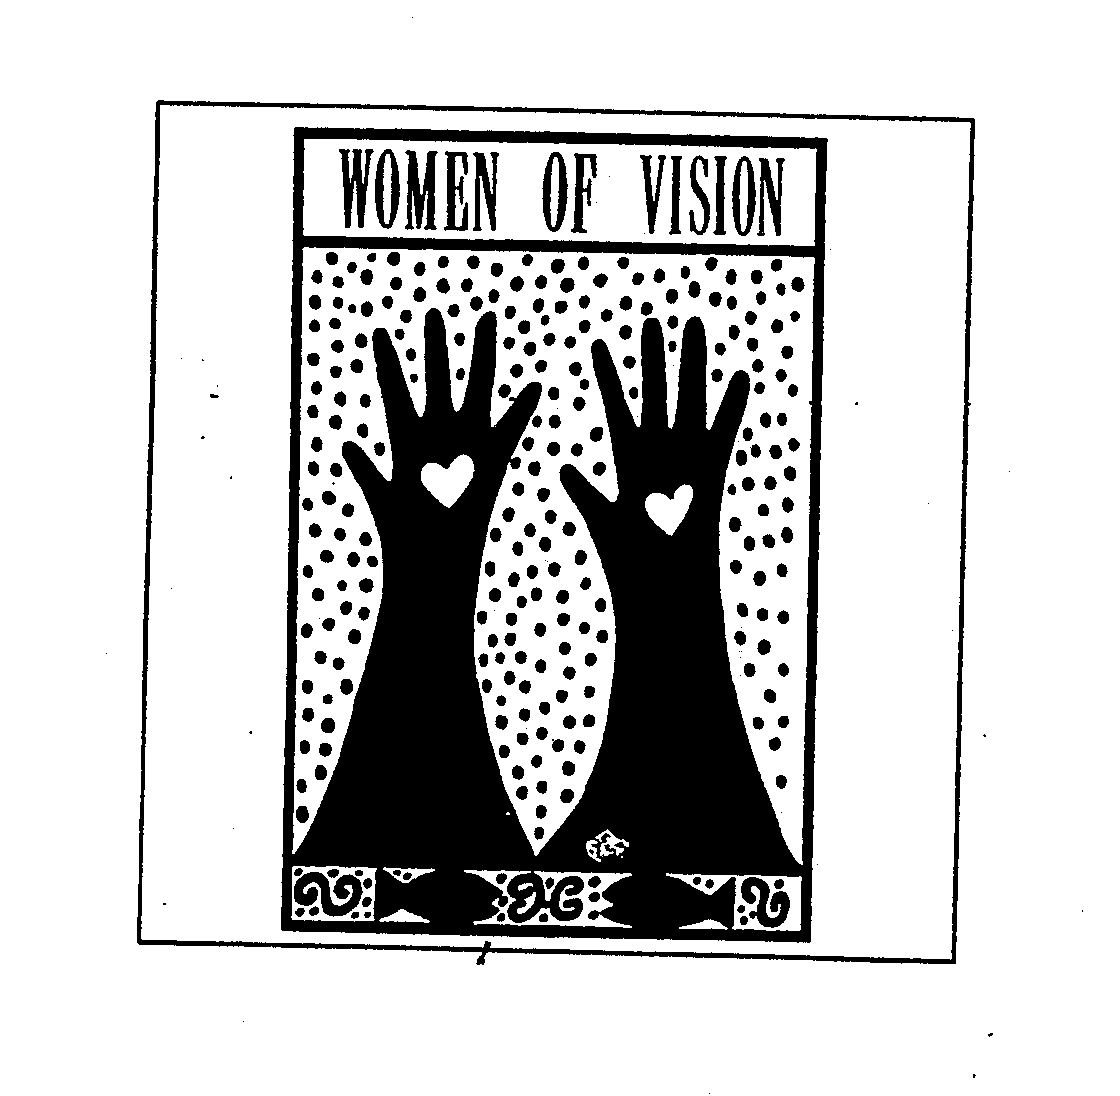  WOMEN OF VISION